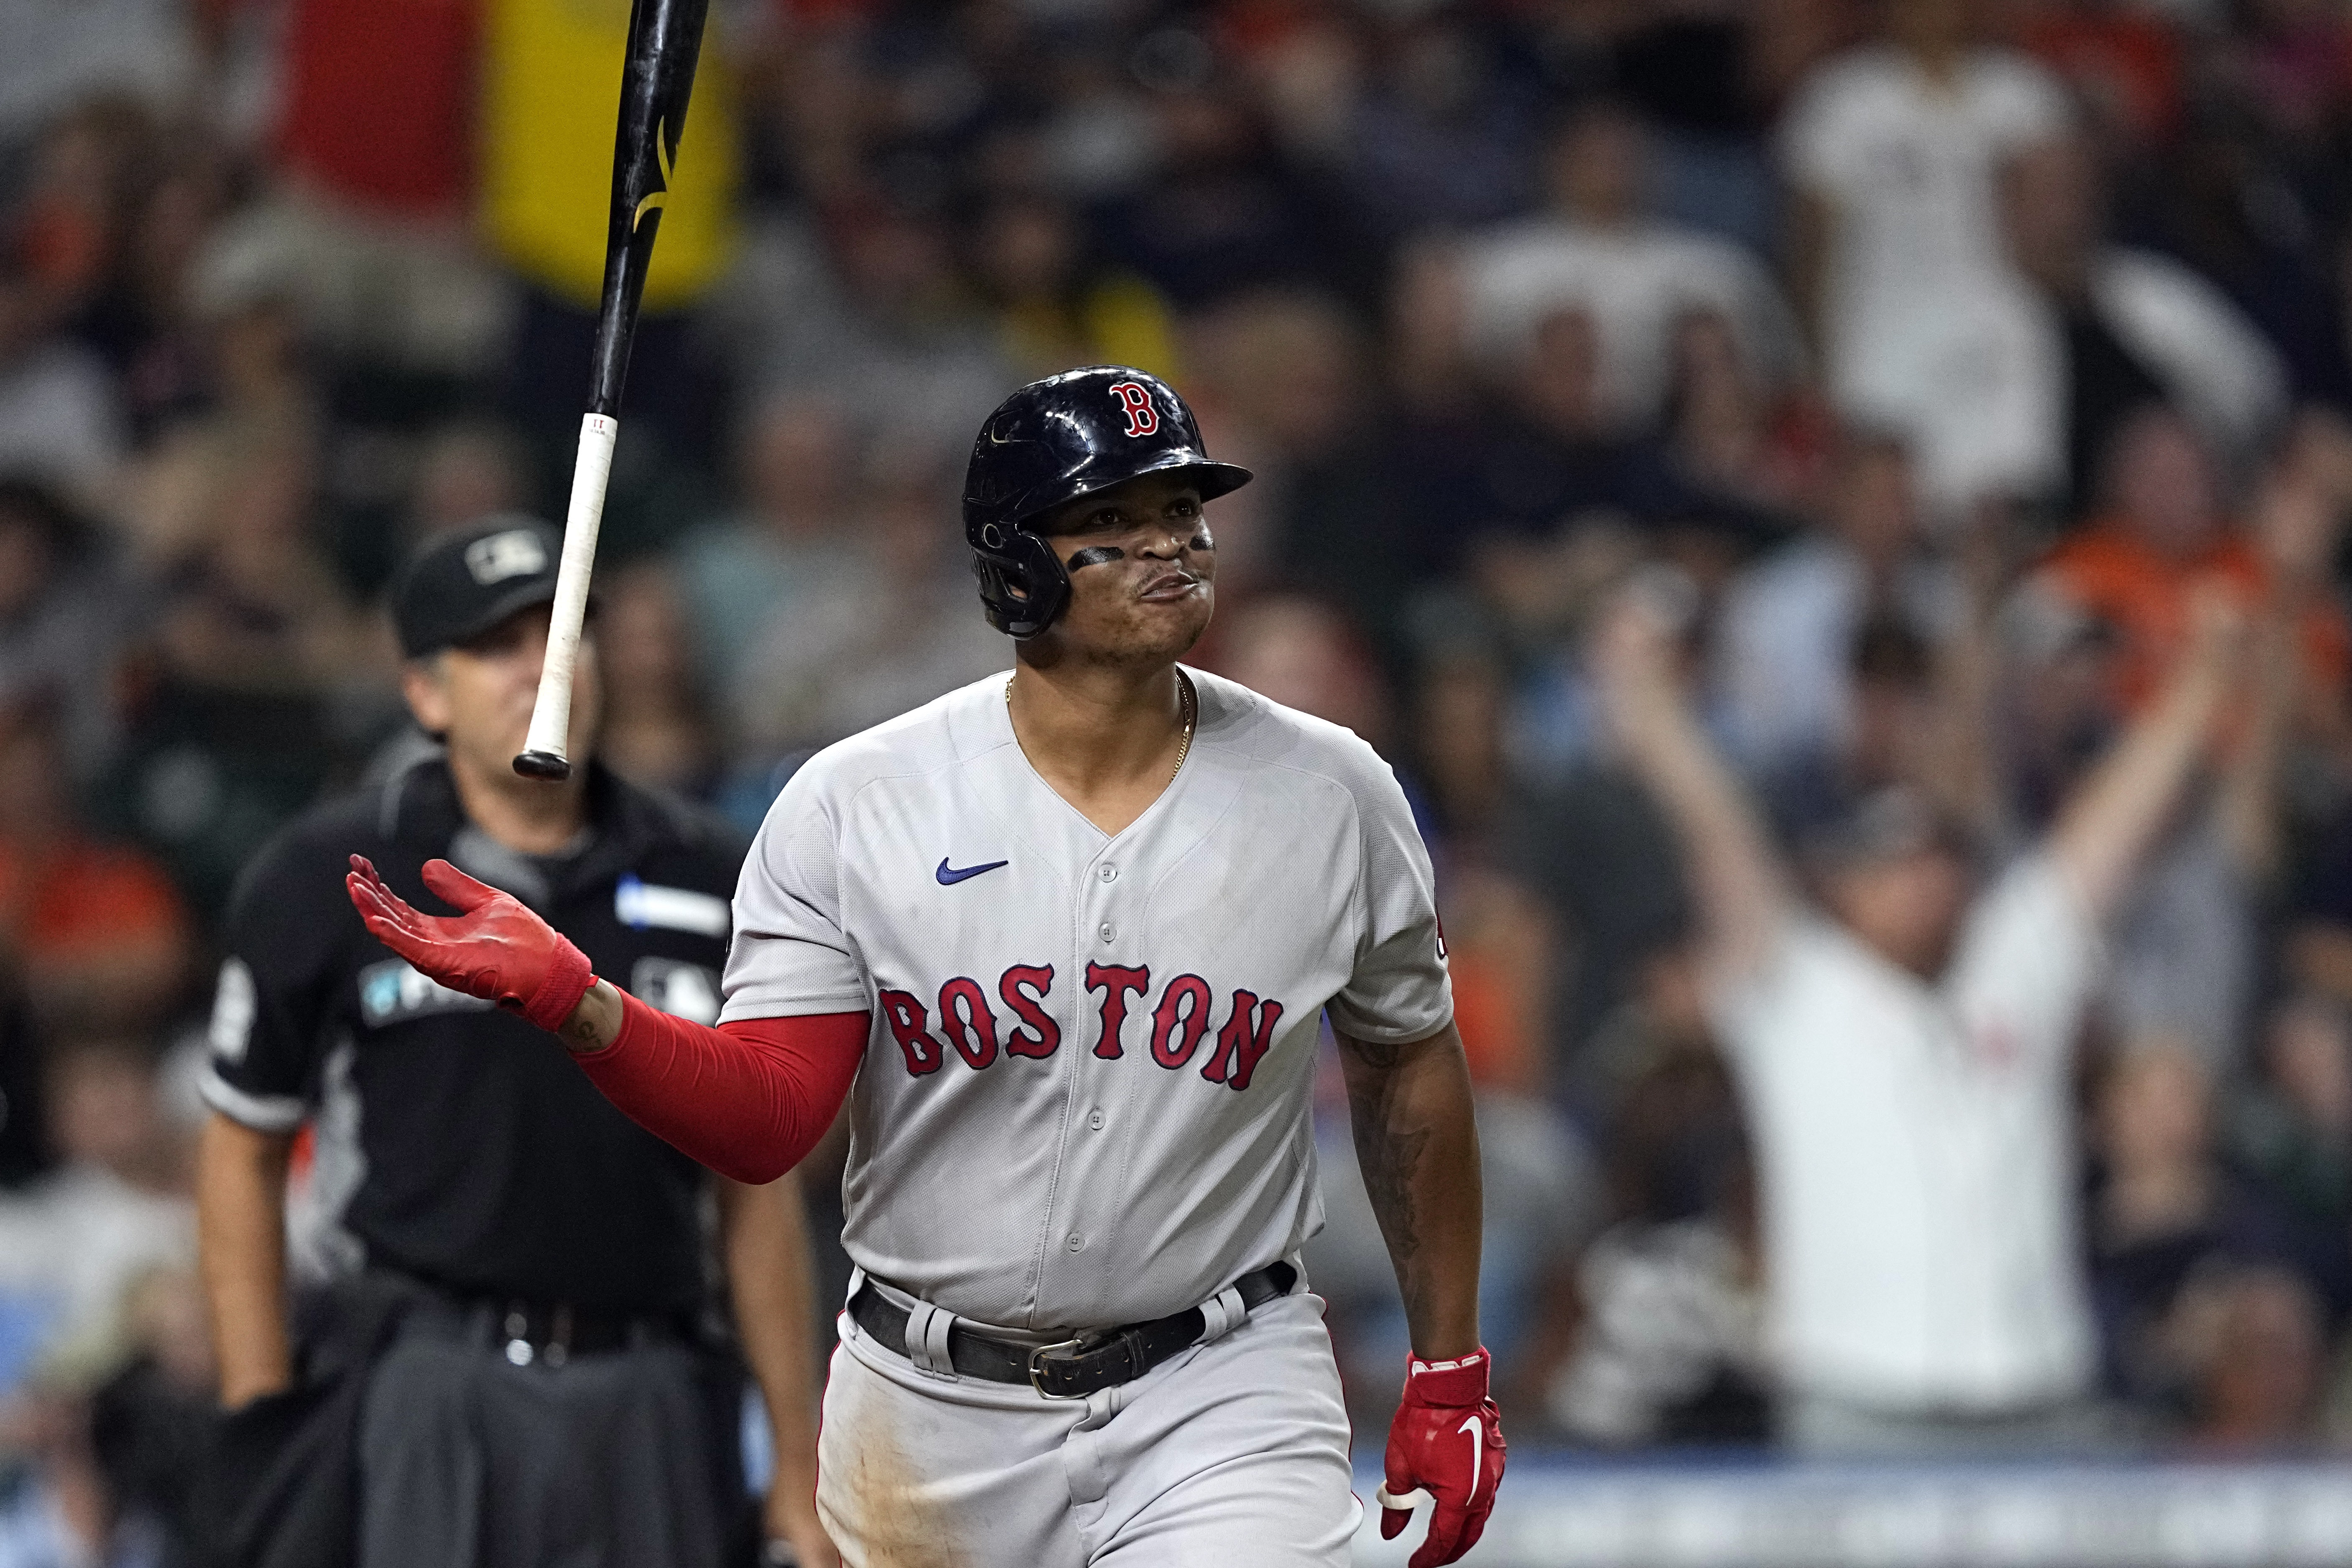 Red Sox call up Rafael Devers from Pawtucket - The Boston Globe